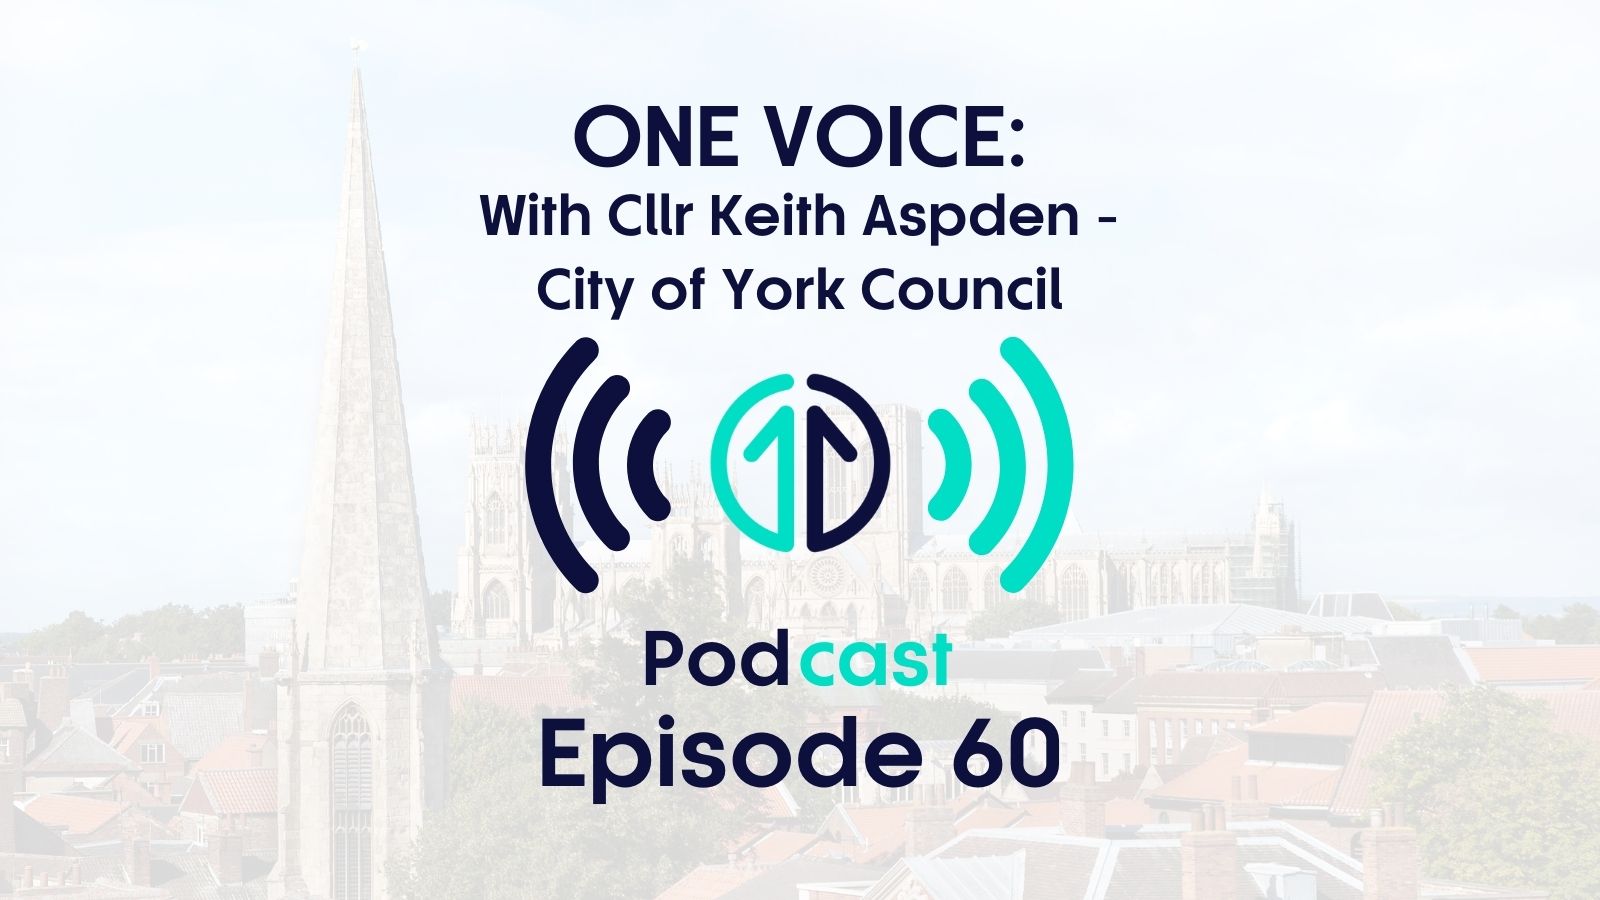 One Voice with Cllr Keith Aspden, City of York | Episode 60